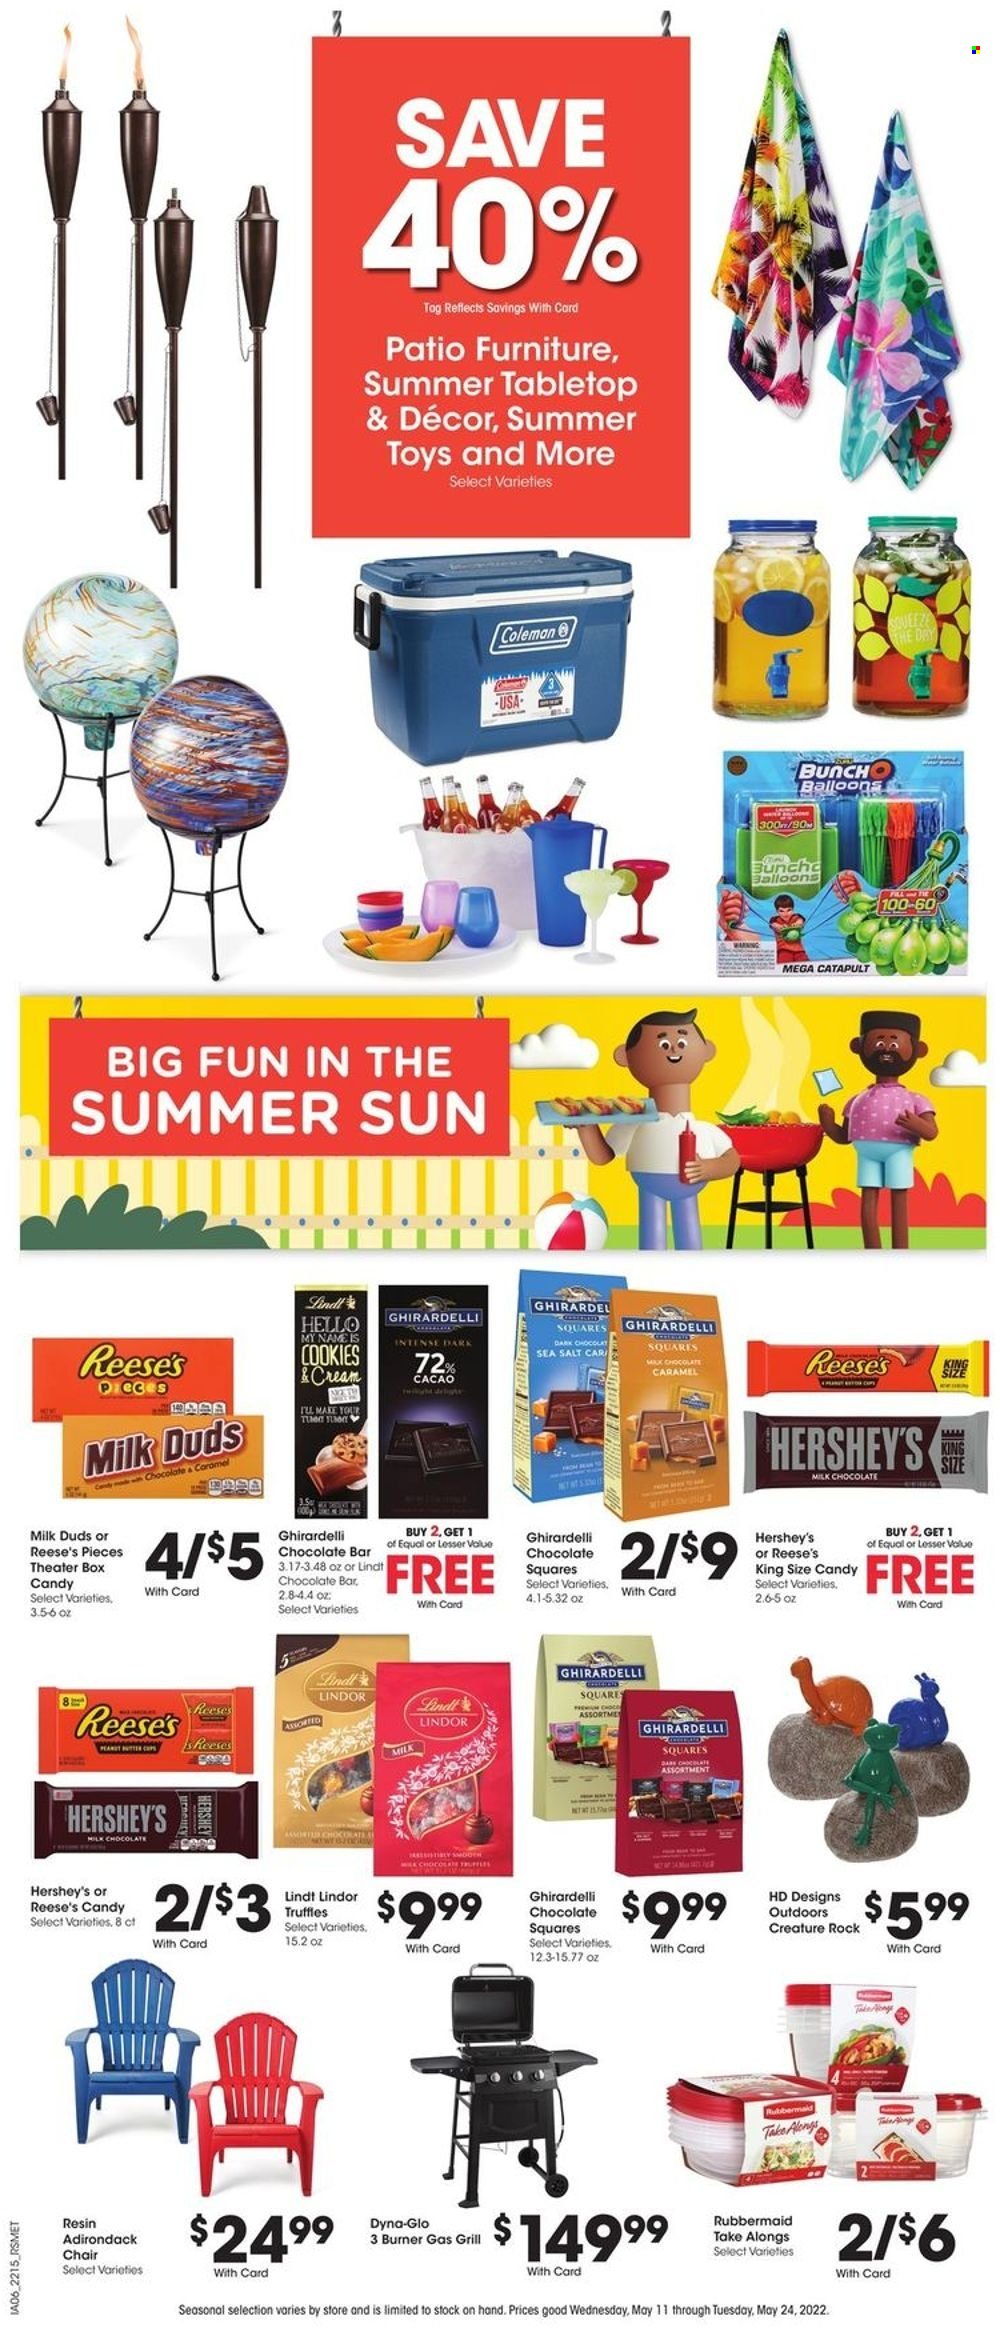 thumbnail - Pick ‘n Save Flyer - 05/18/2022 - 05/24/2022 - Sales products - Reese's, Hershey's, cookies, milk chocolate, Milk Duds, Lindt, Lindor, Ghirardelli, chocolate bar, sea salt, caramel, balloons, chair, Coleman, gas grill, grill. Page 10.